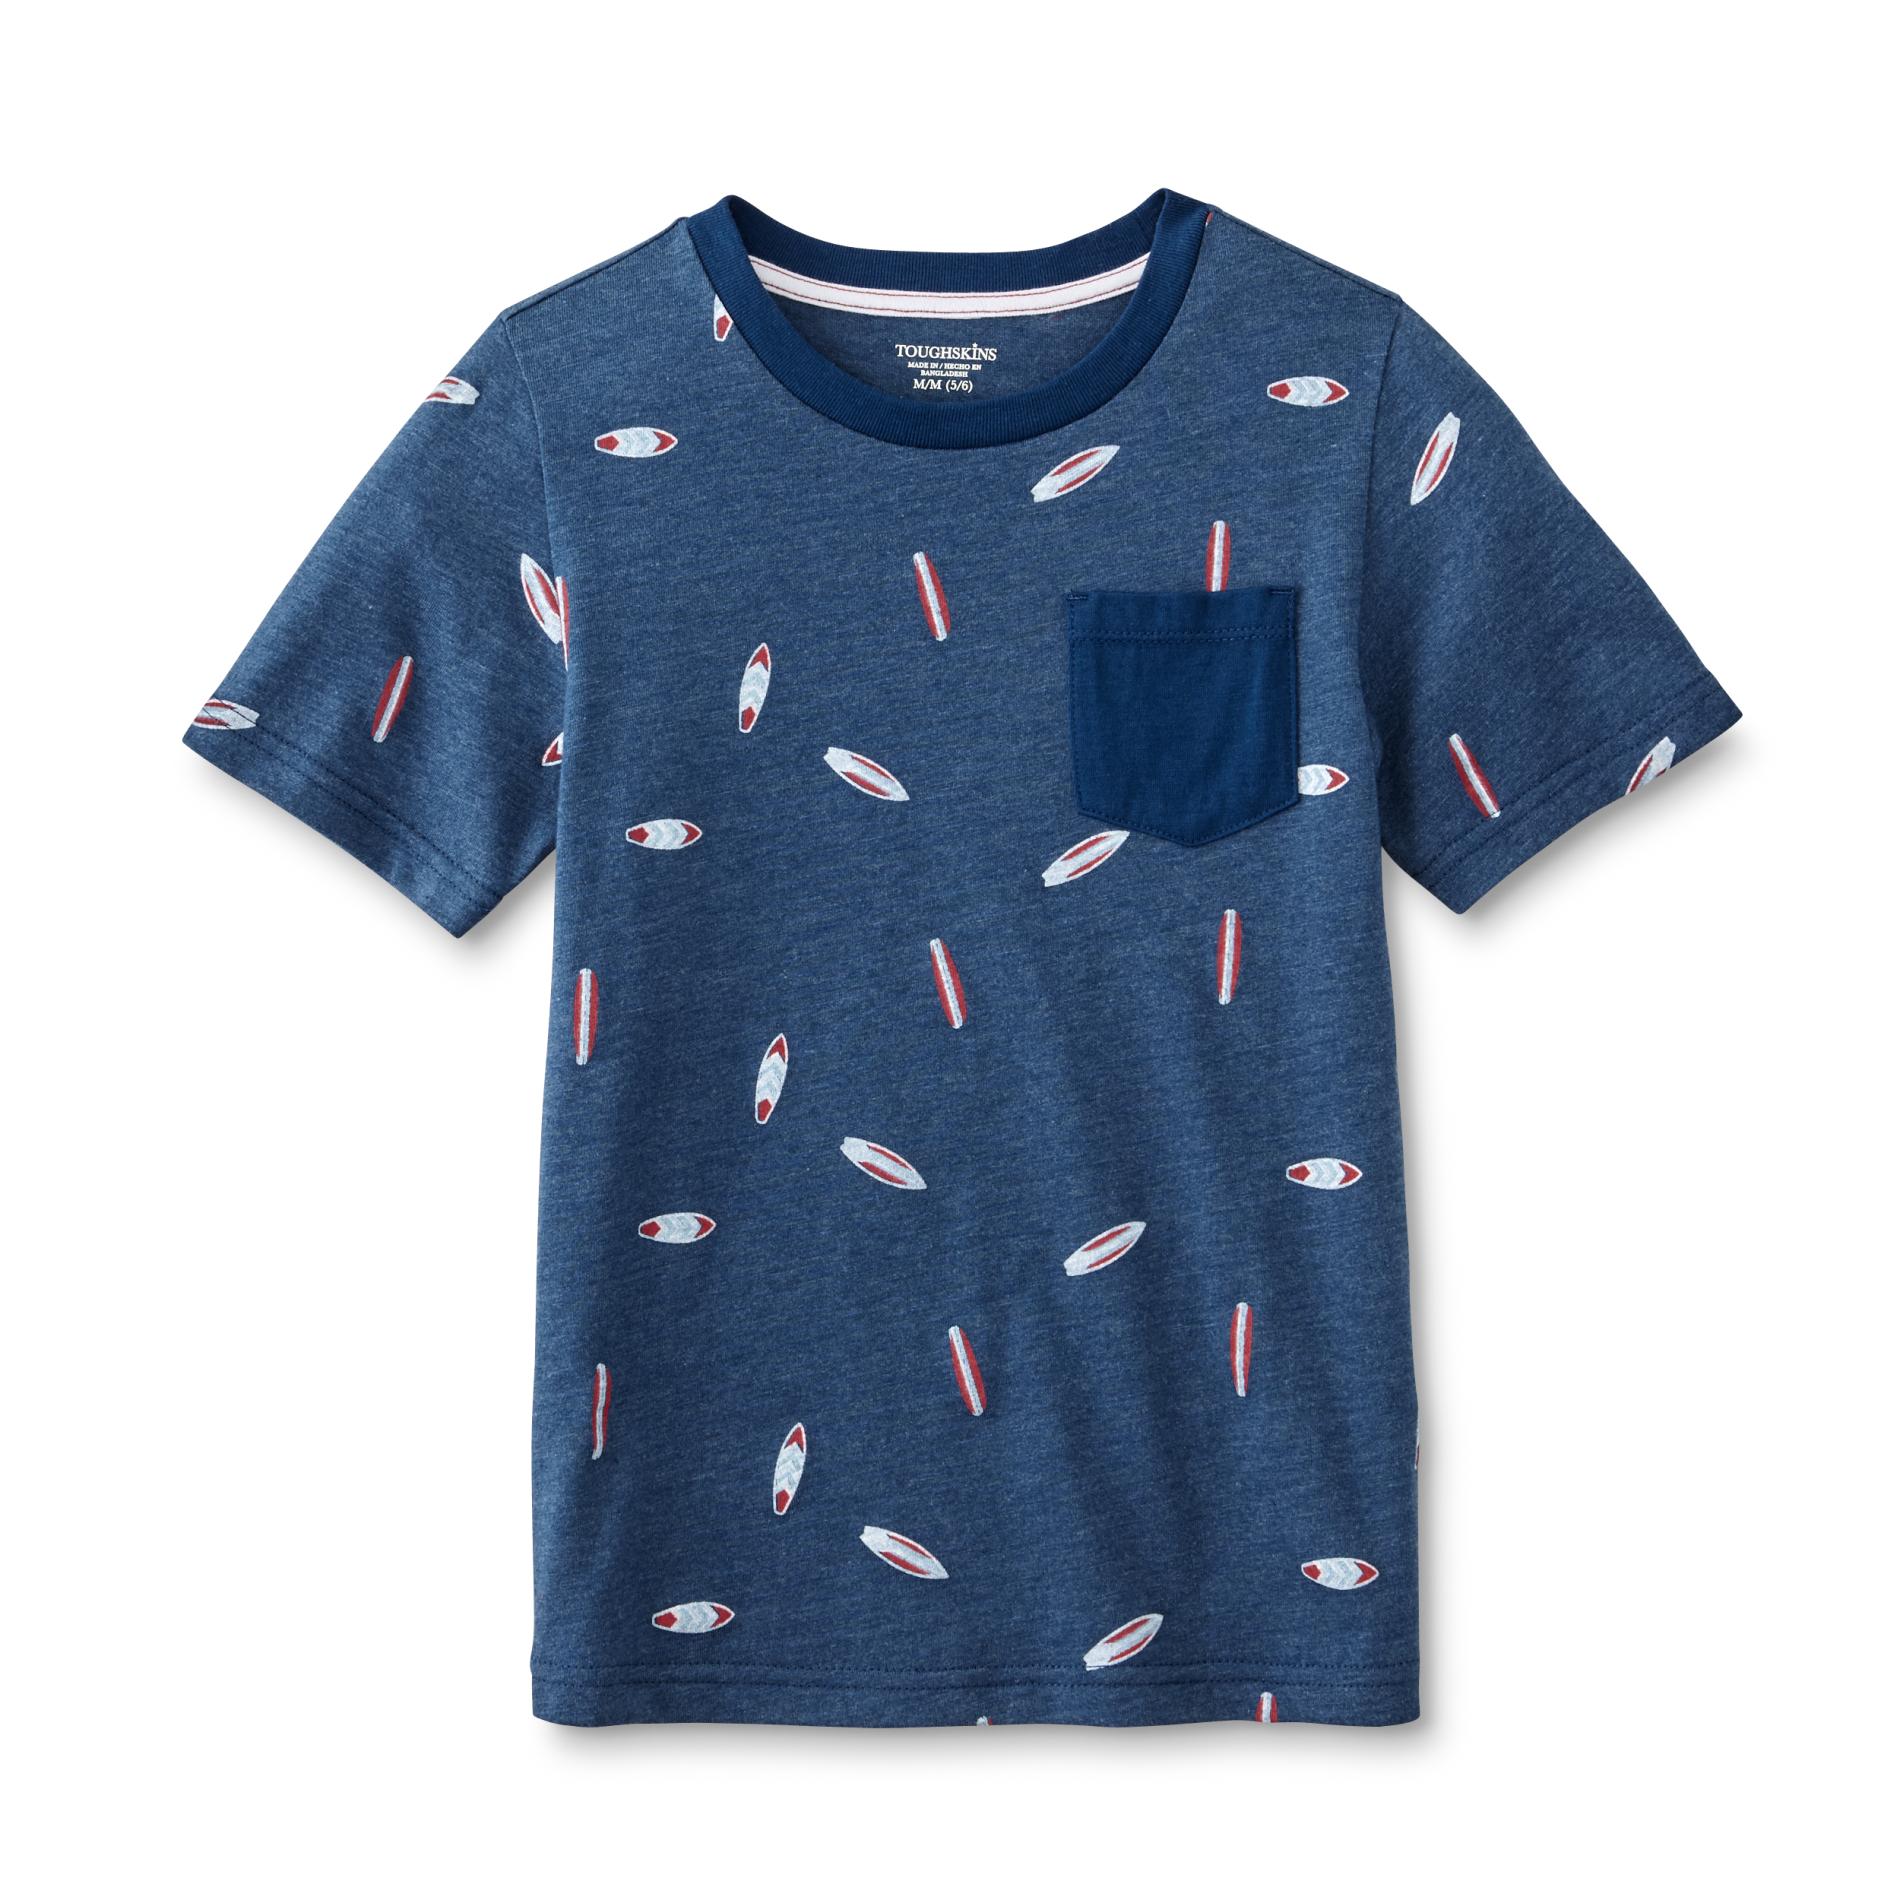 Toughskins Infant and Toddler Boys' Pocket Graphic T-Shirt - Surfboards